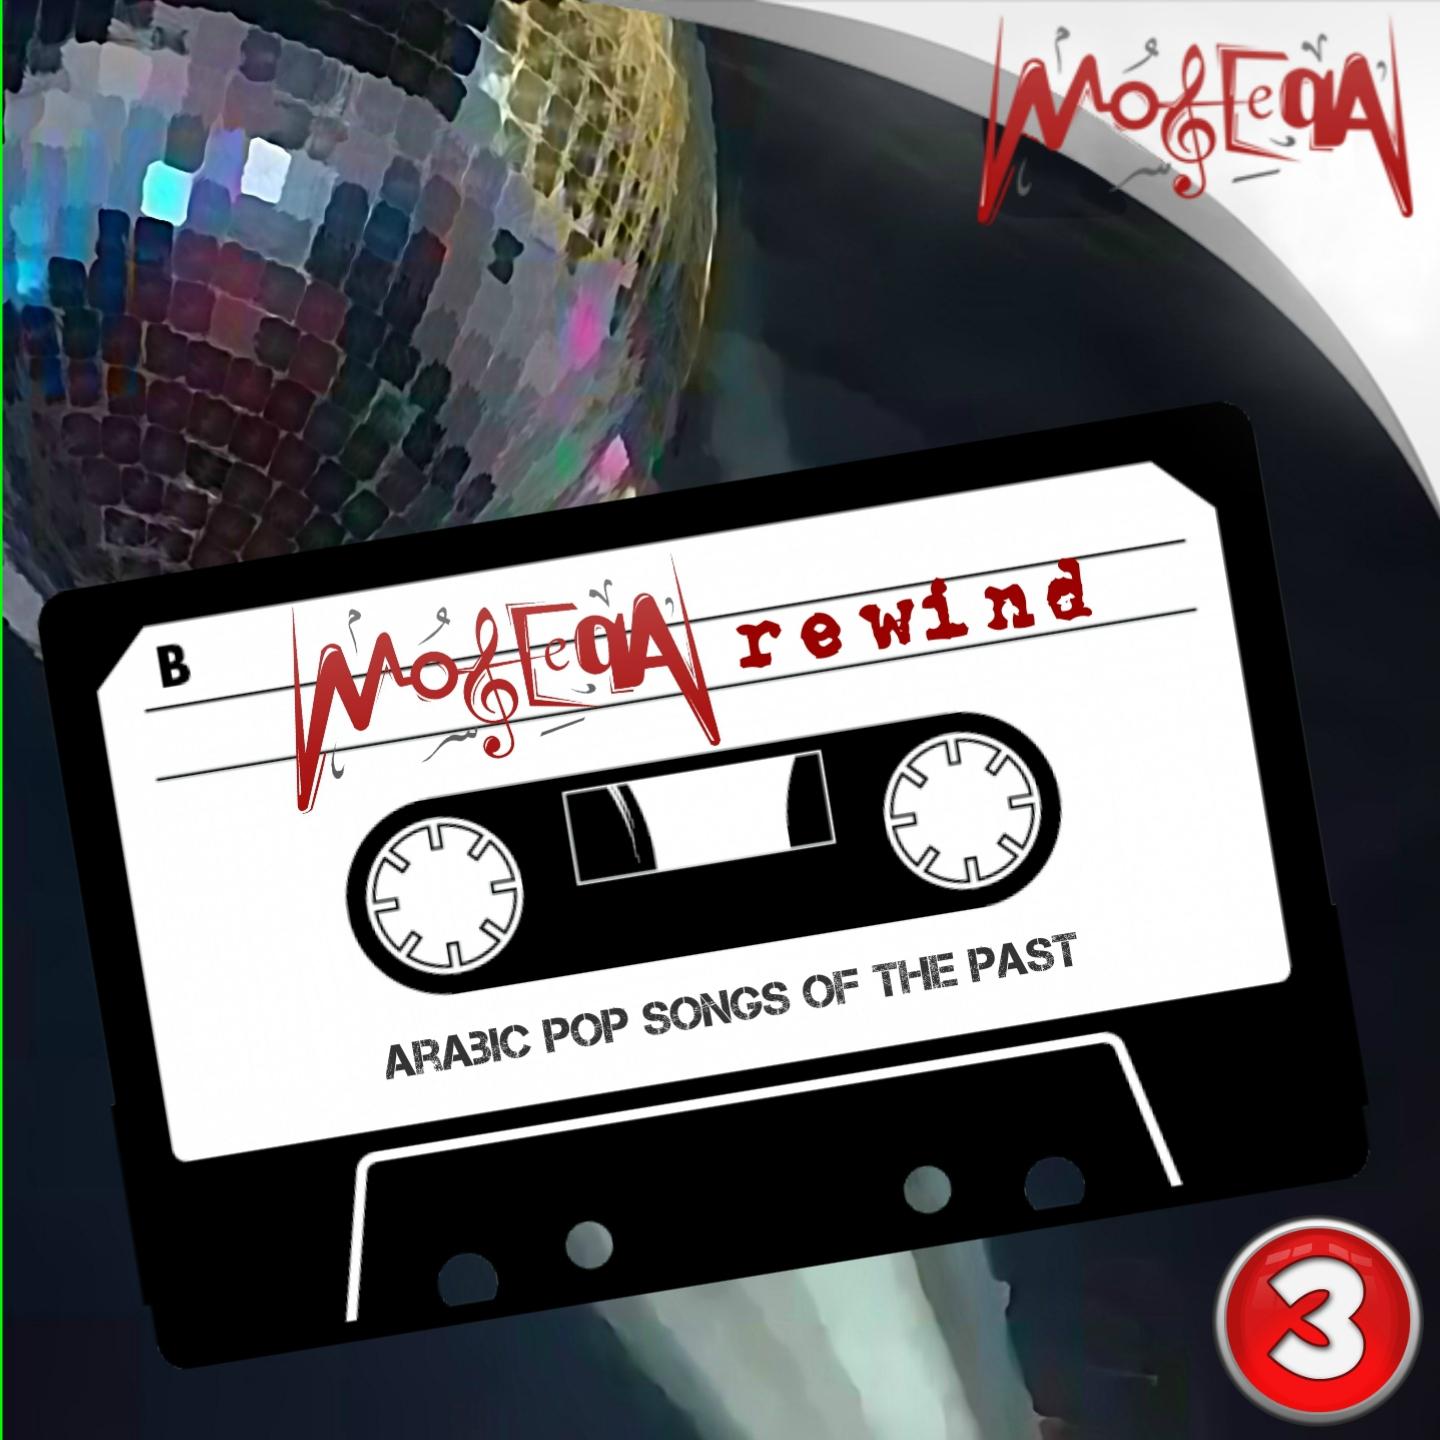 Moseeqa Rewind, Vol. 3 (Arabic Pop Songs of the Past)